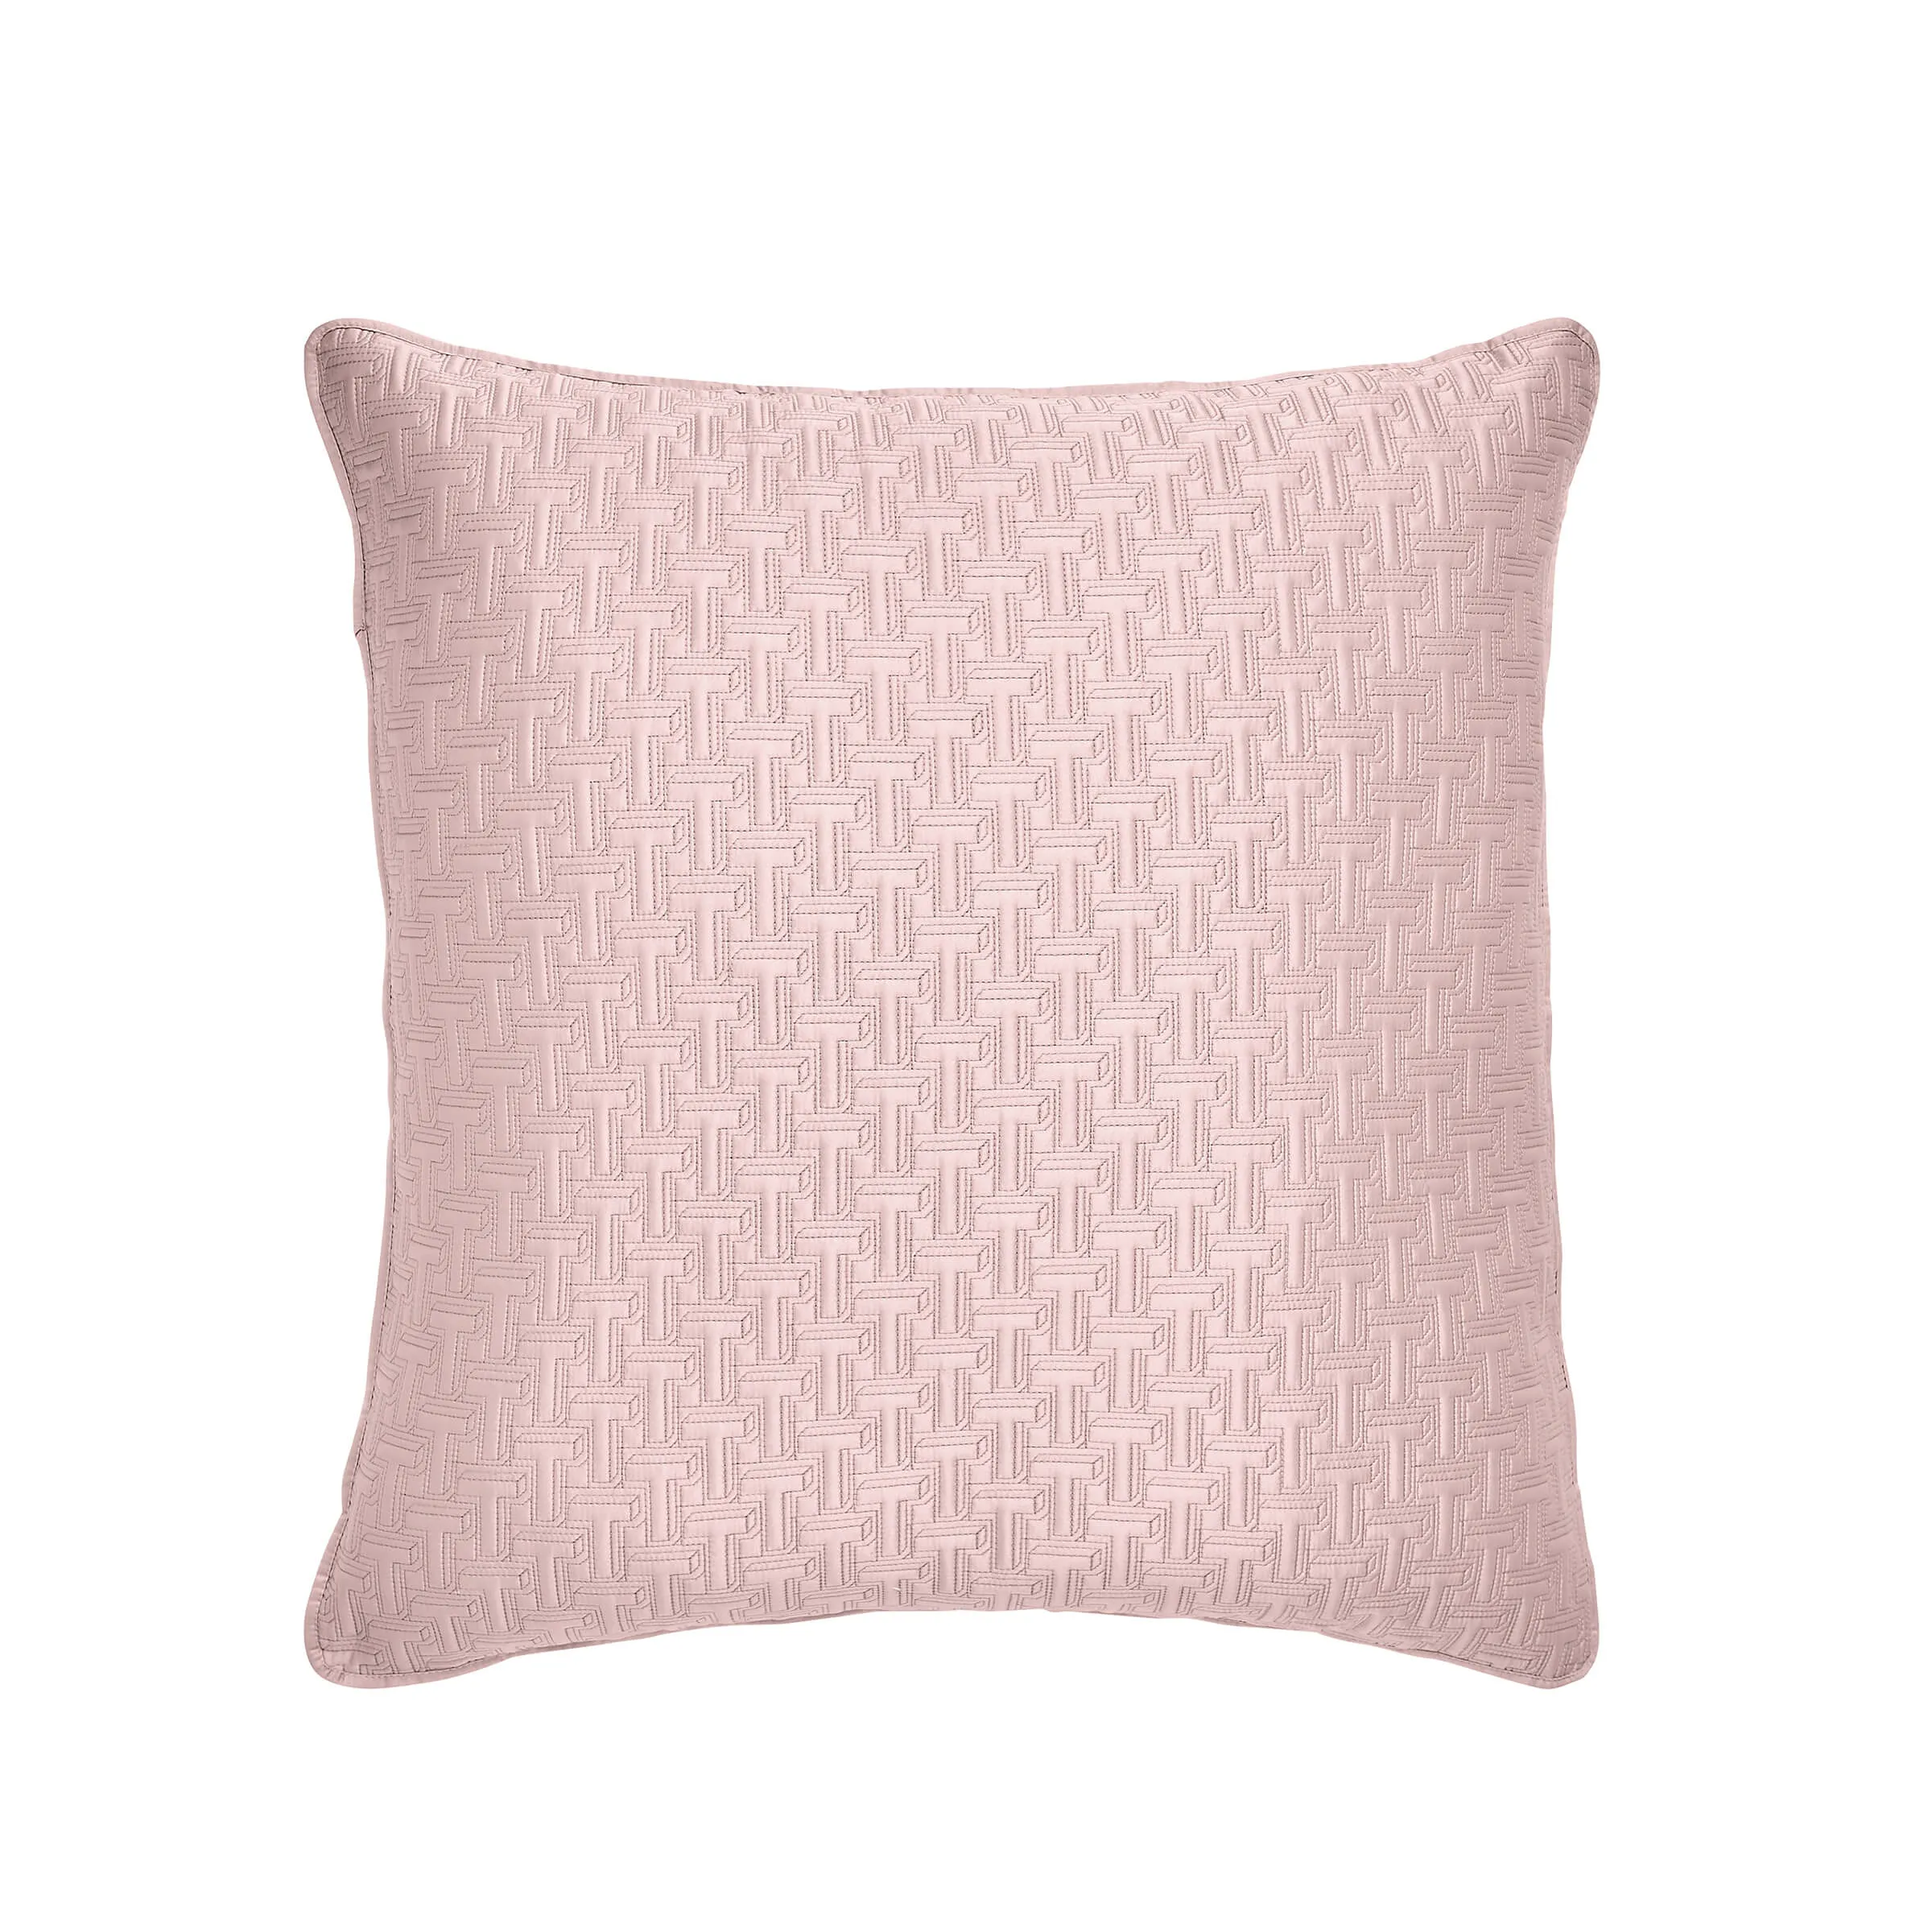 Ted Baker T Quilted Sham Pillowcase 65cm x 65cm, Soft Pink